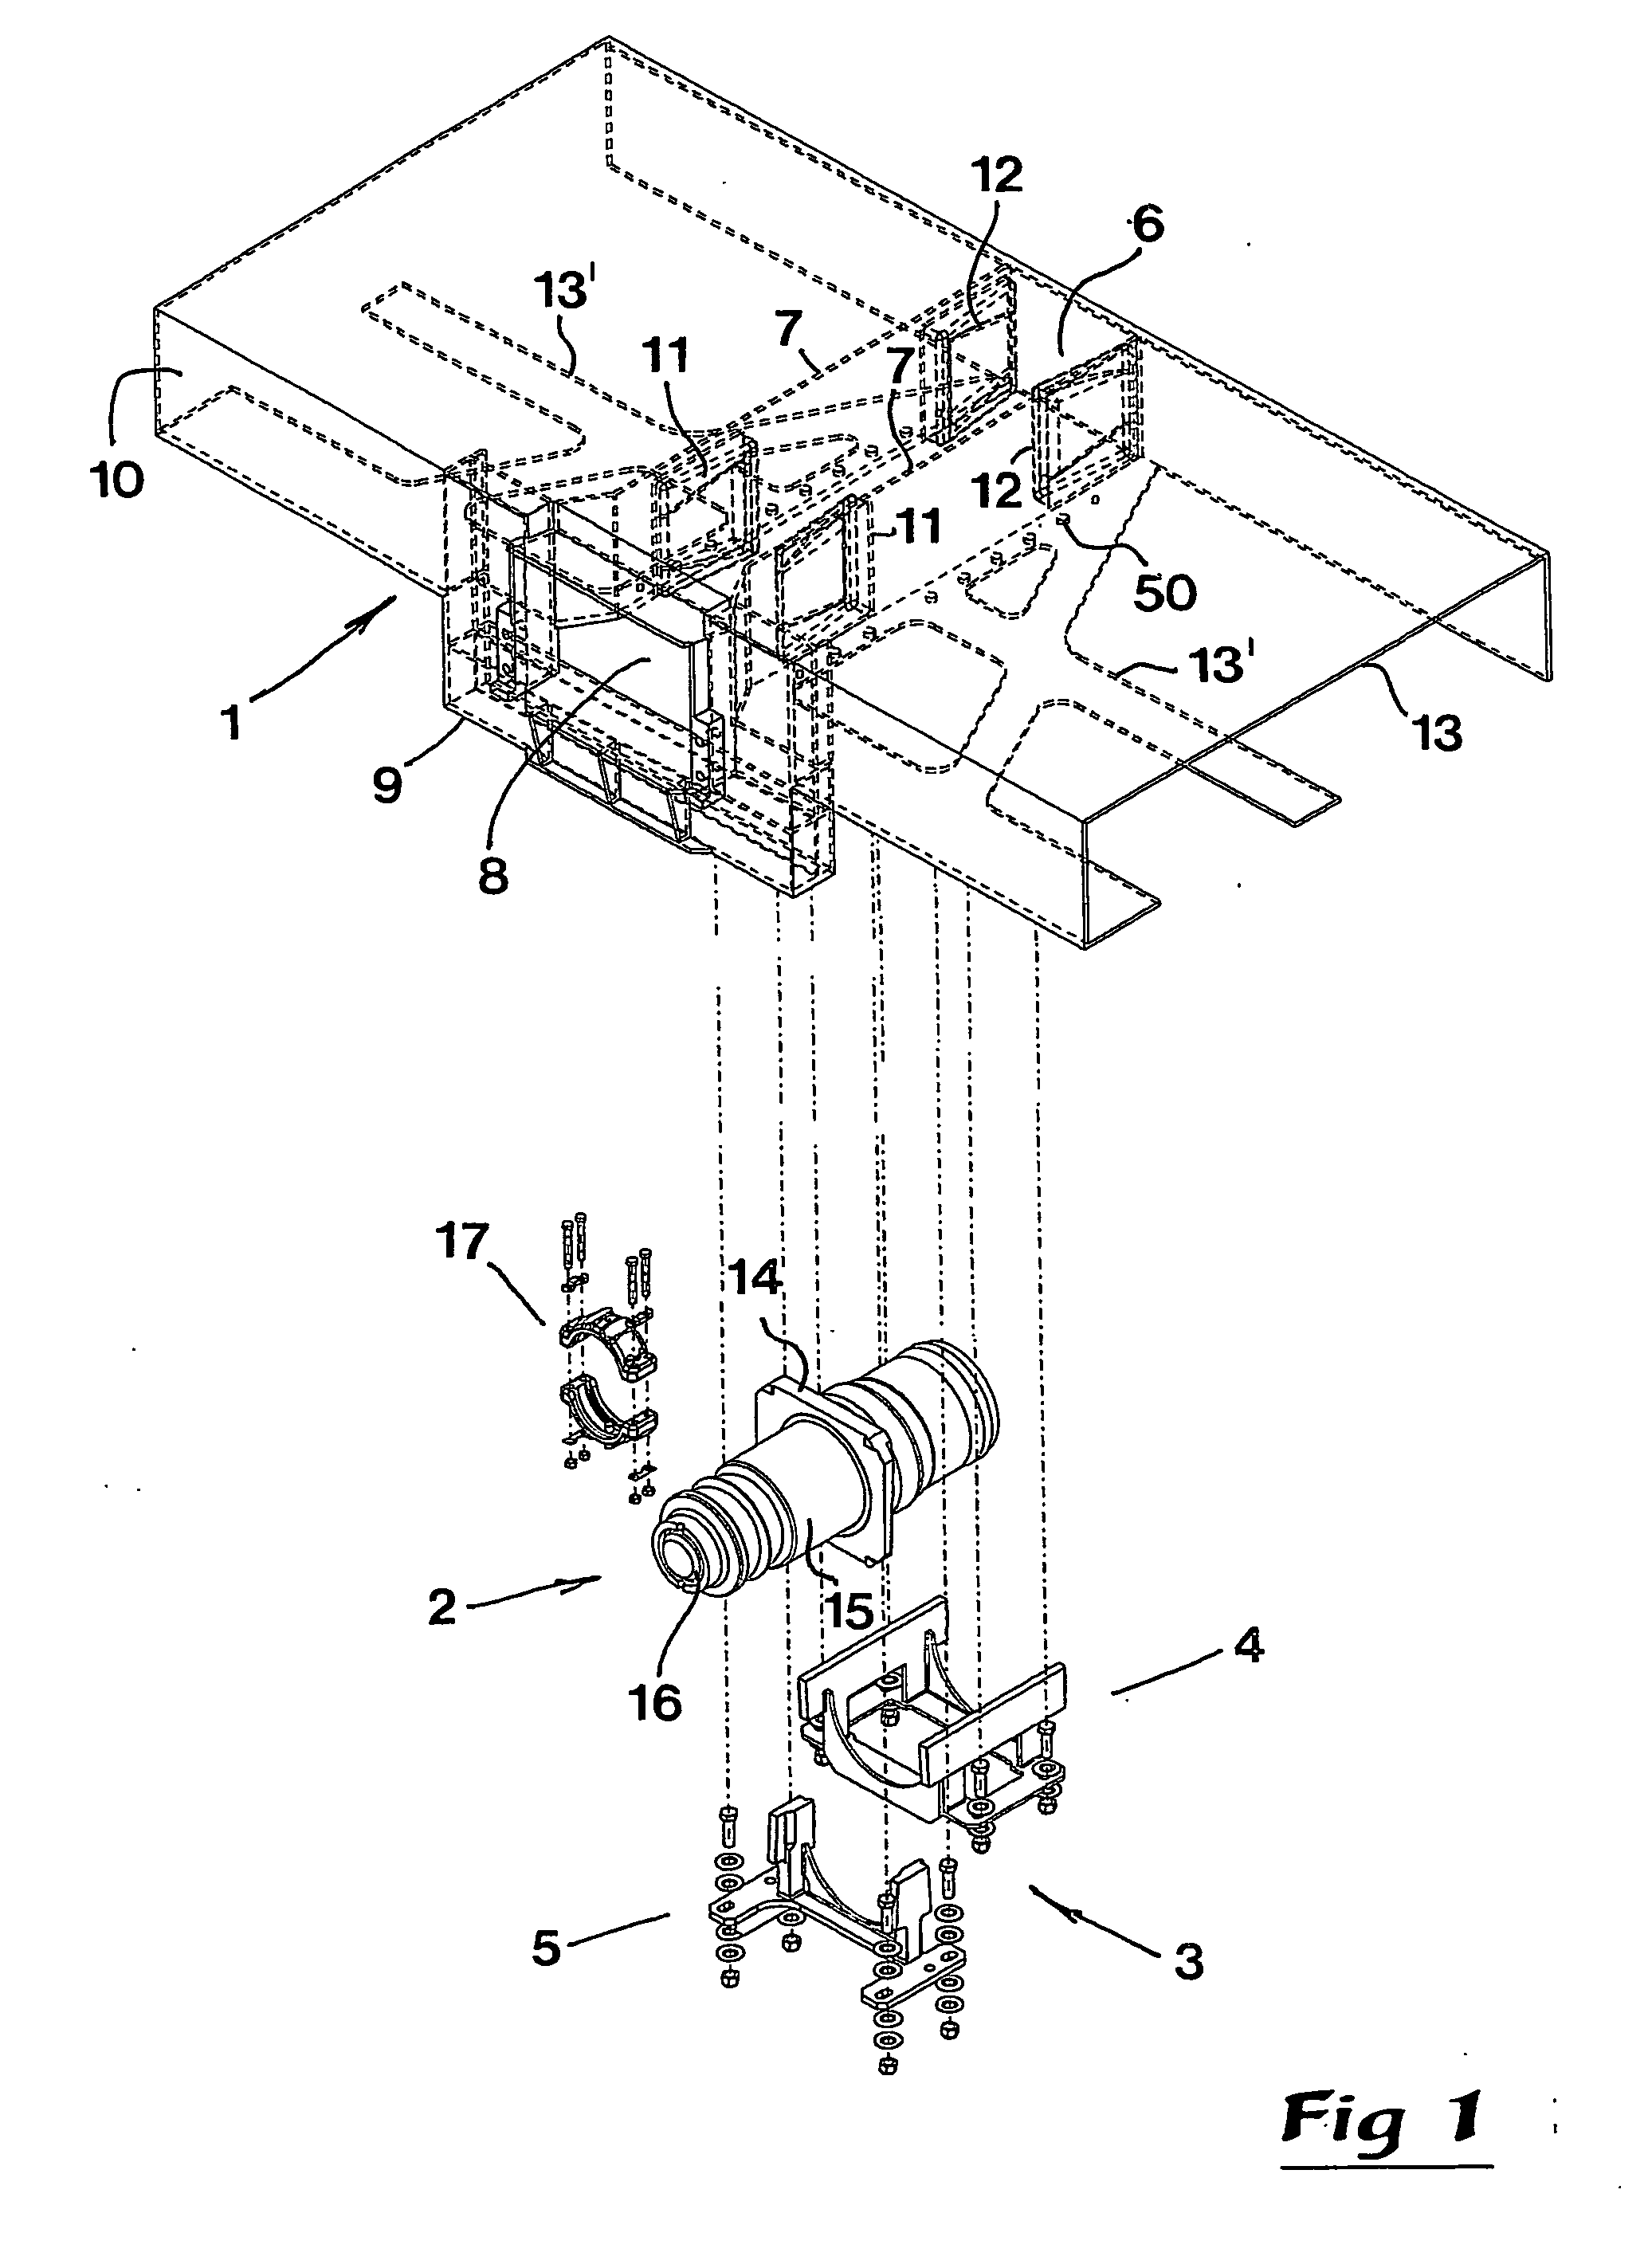 Railway vehicle and a clamping arrangement for the fixation of a towing arrangement in such vehicles